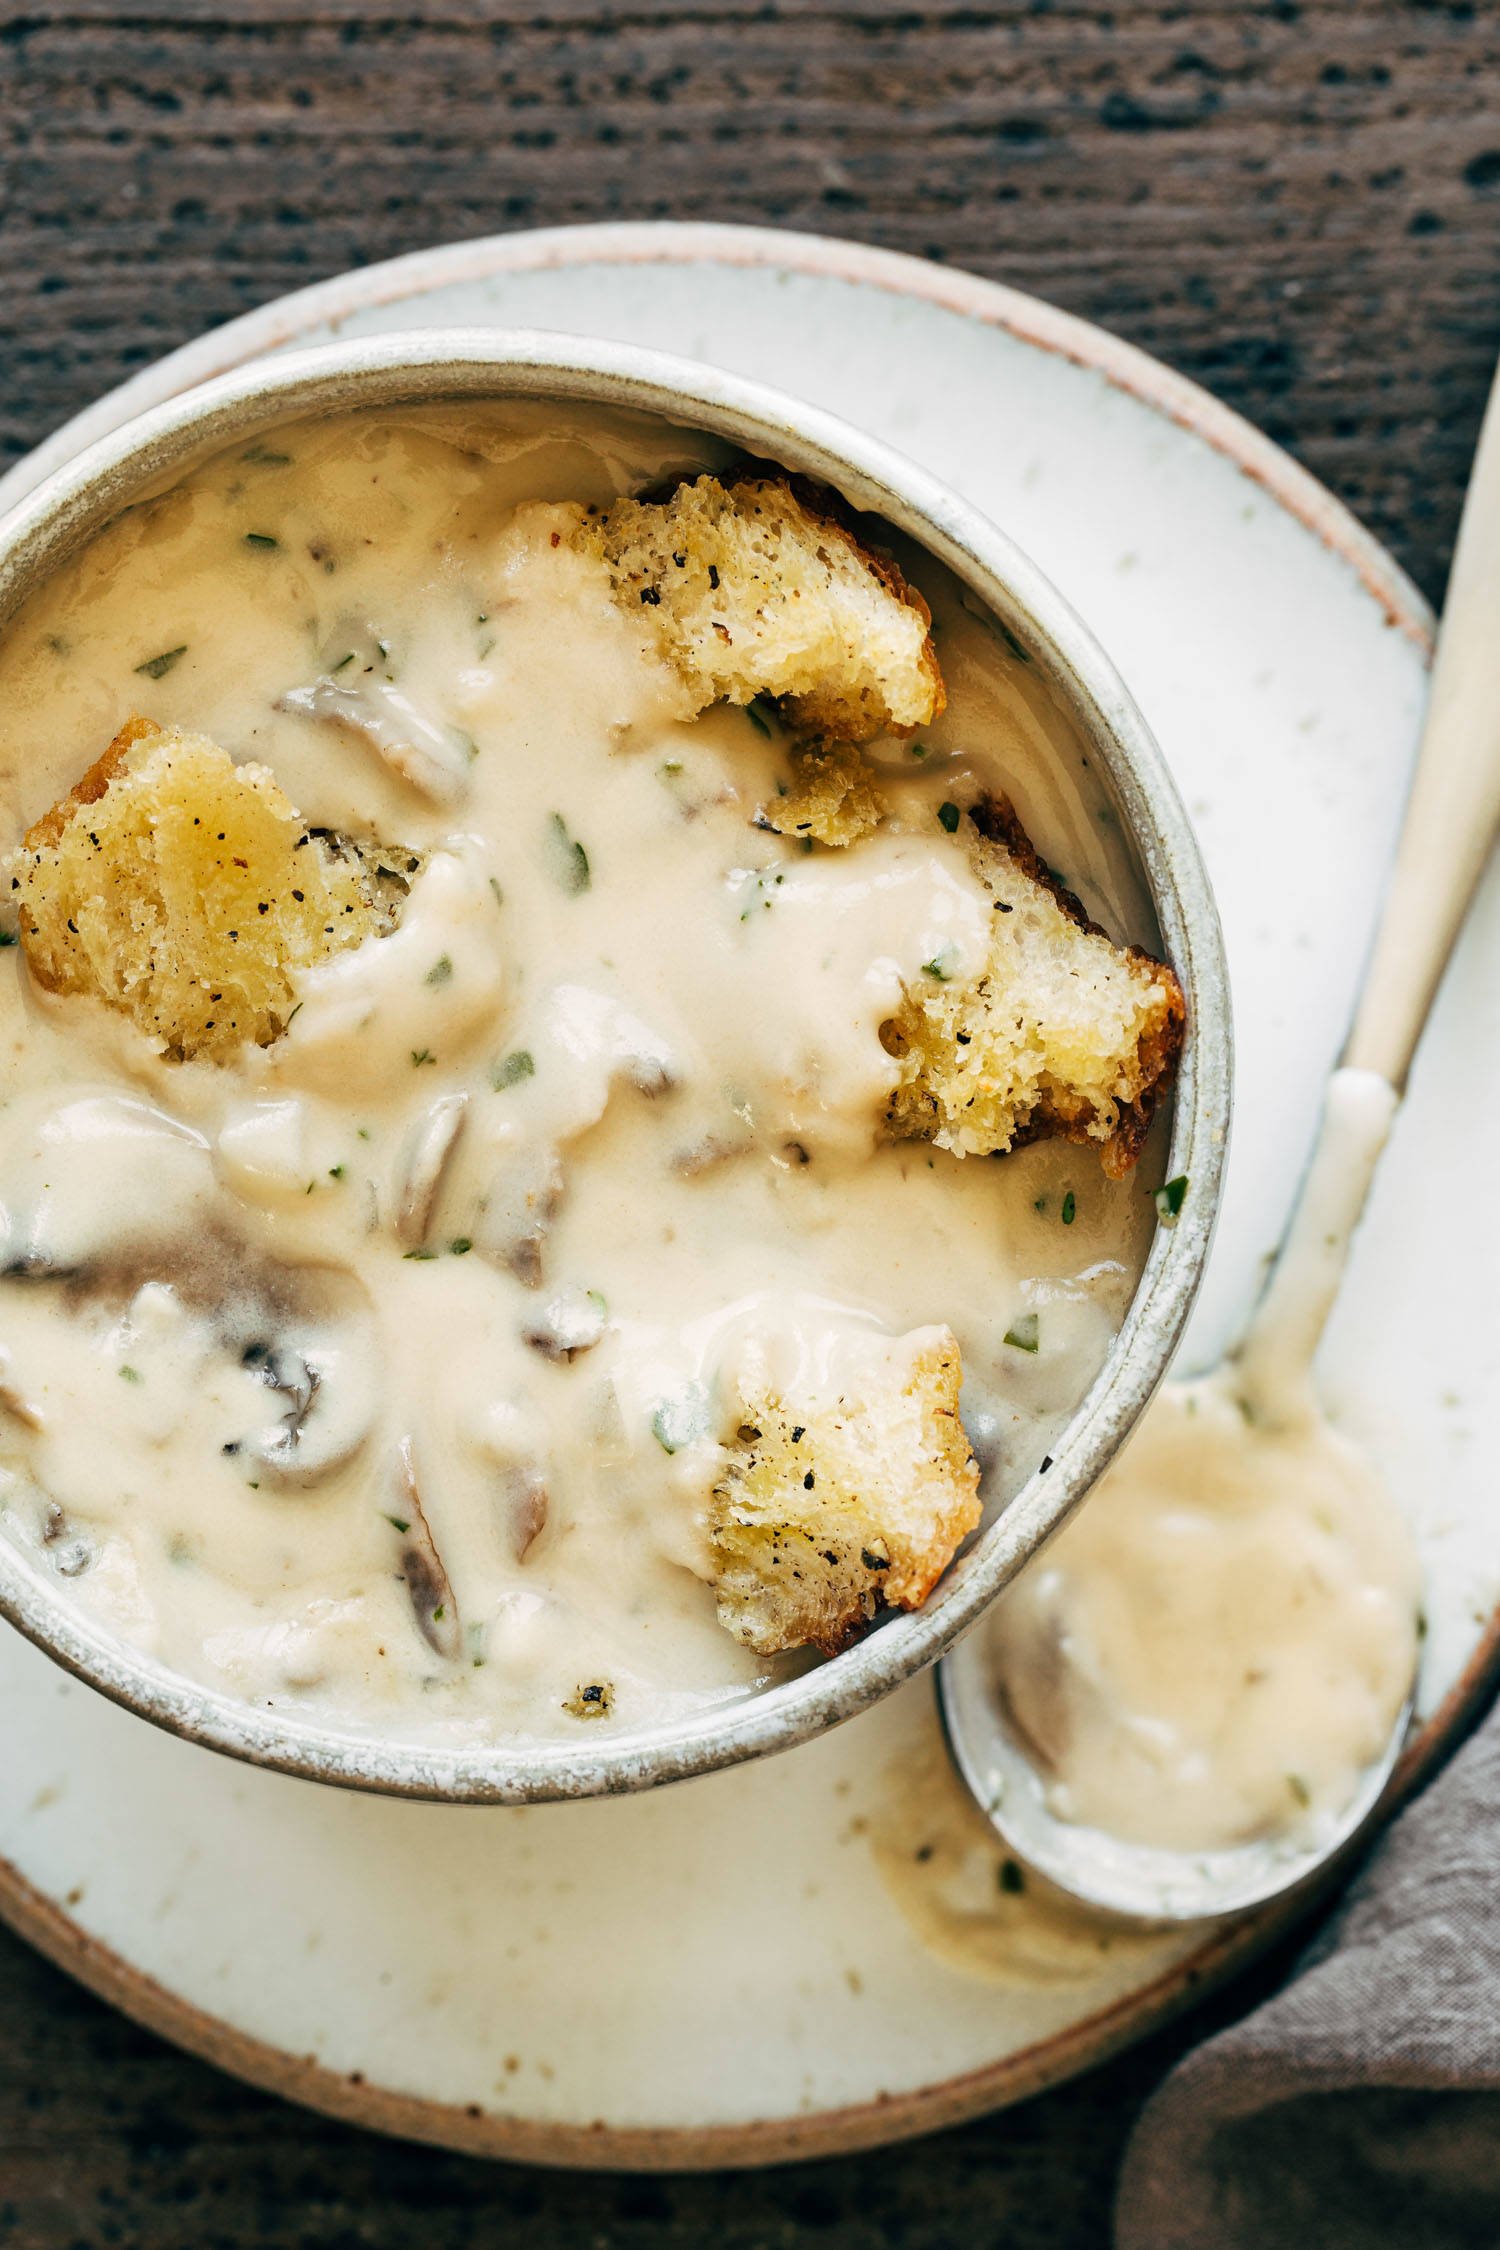 Creamy mushroom soup in a bowl. There's a spoon on the side and croutons on top of the soup.